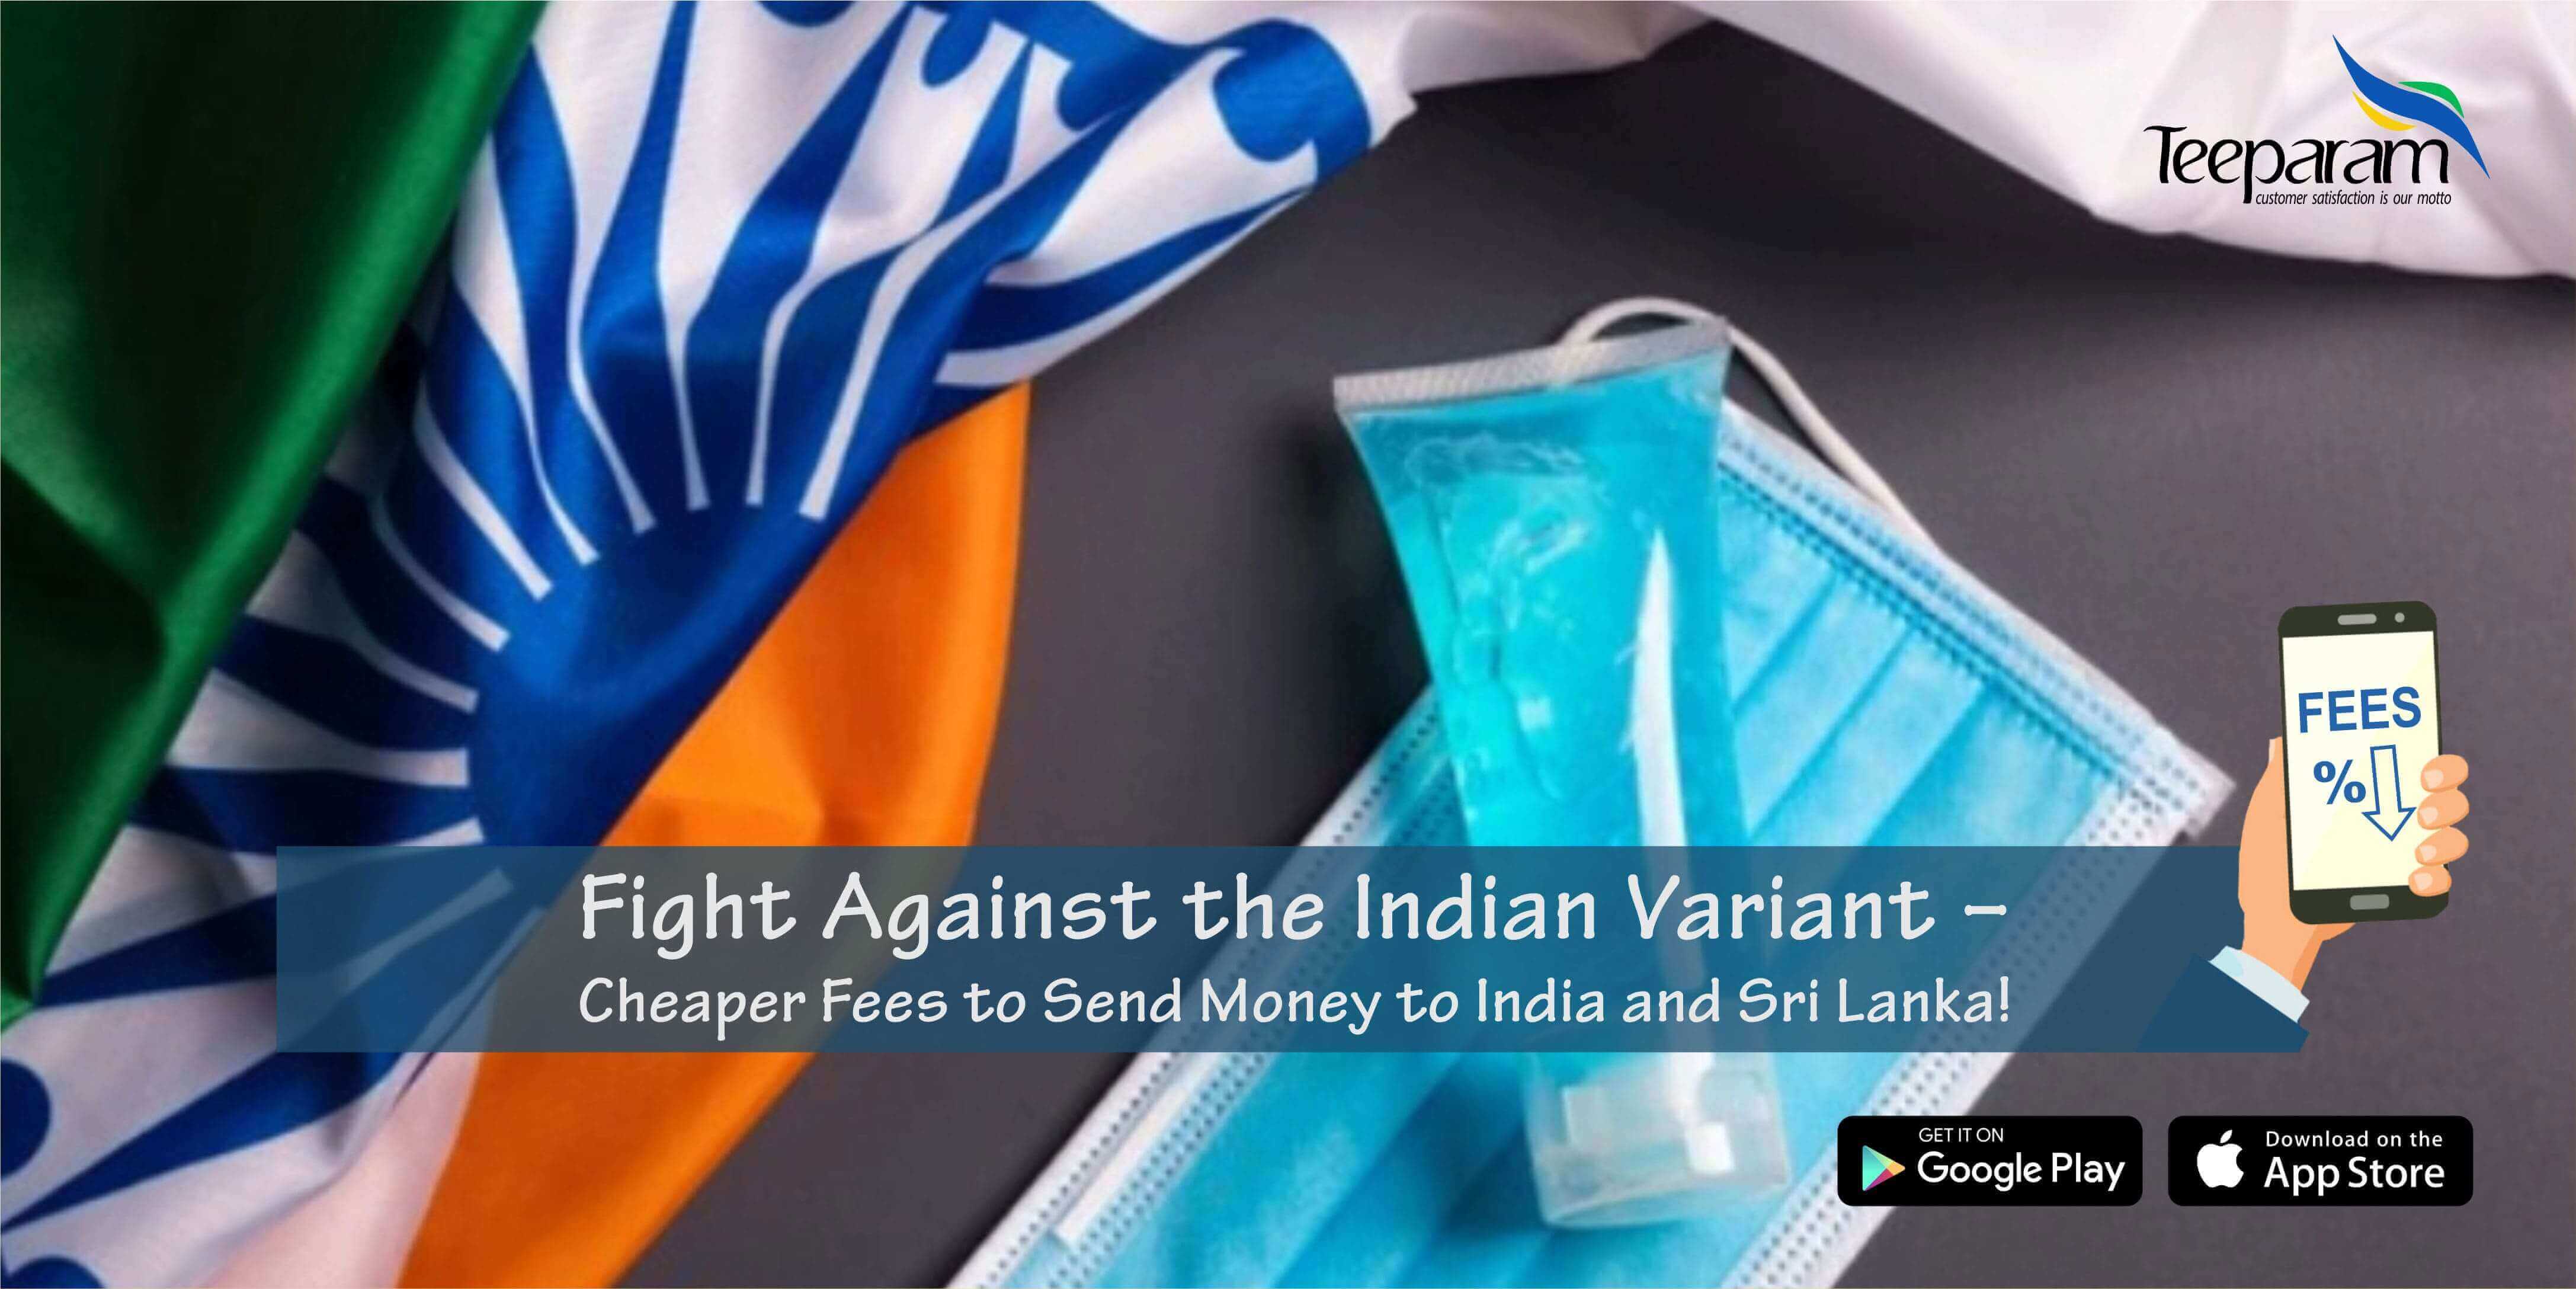 Fight Against the Indian Variant - Cheaper Fees to Send Money to India and Sri Lanka!